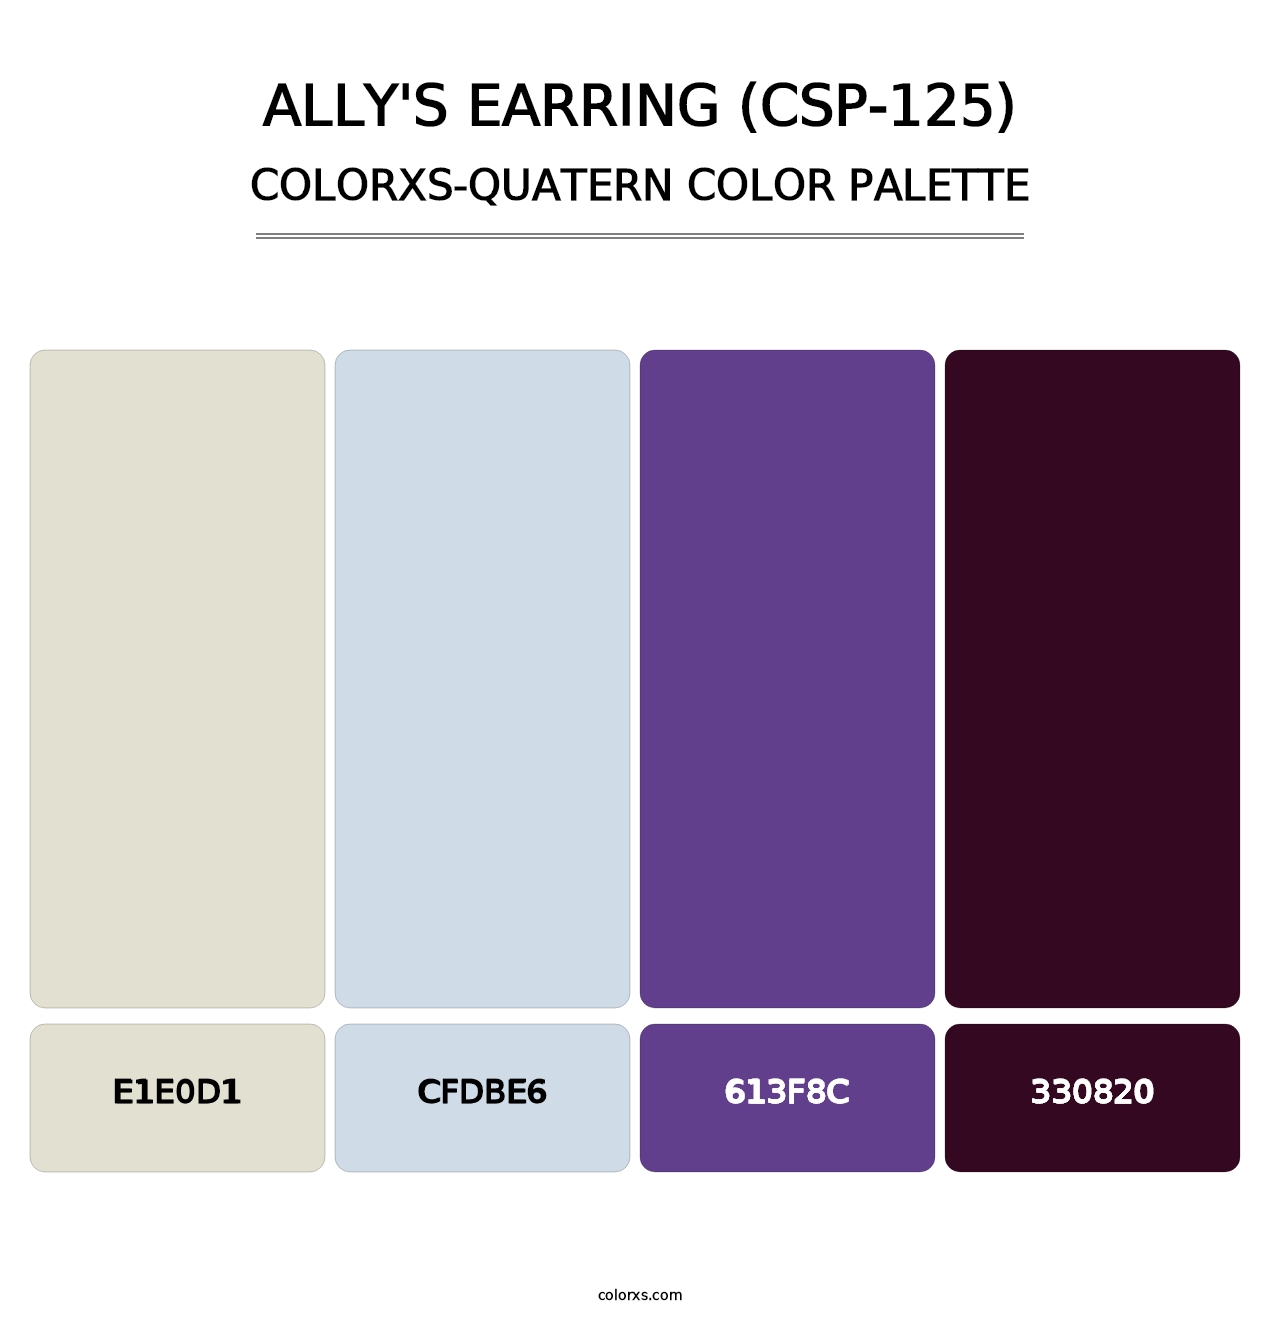 Ally's Earring (CSP-125) - Colorxs Quatern Palette